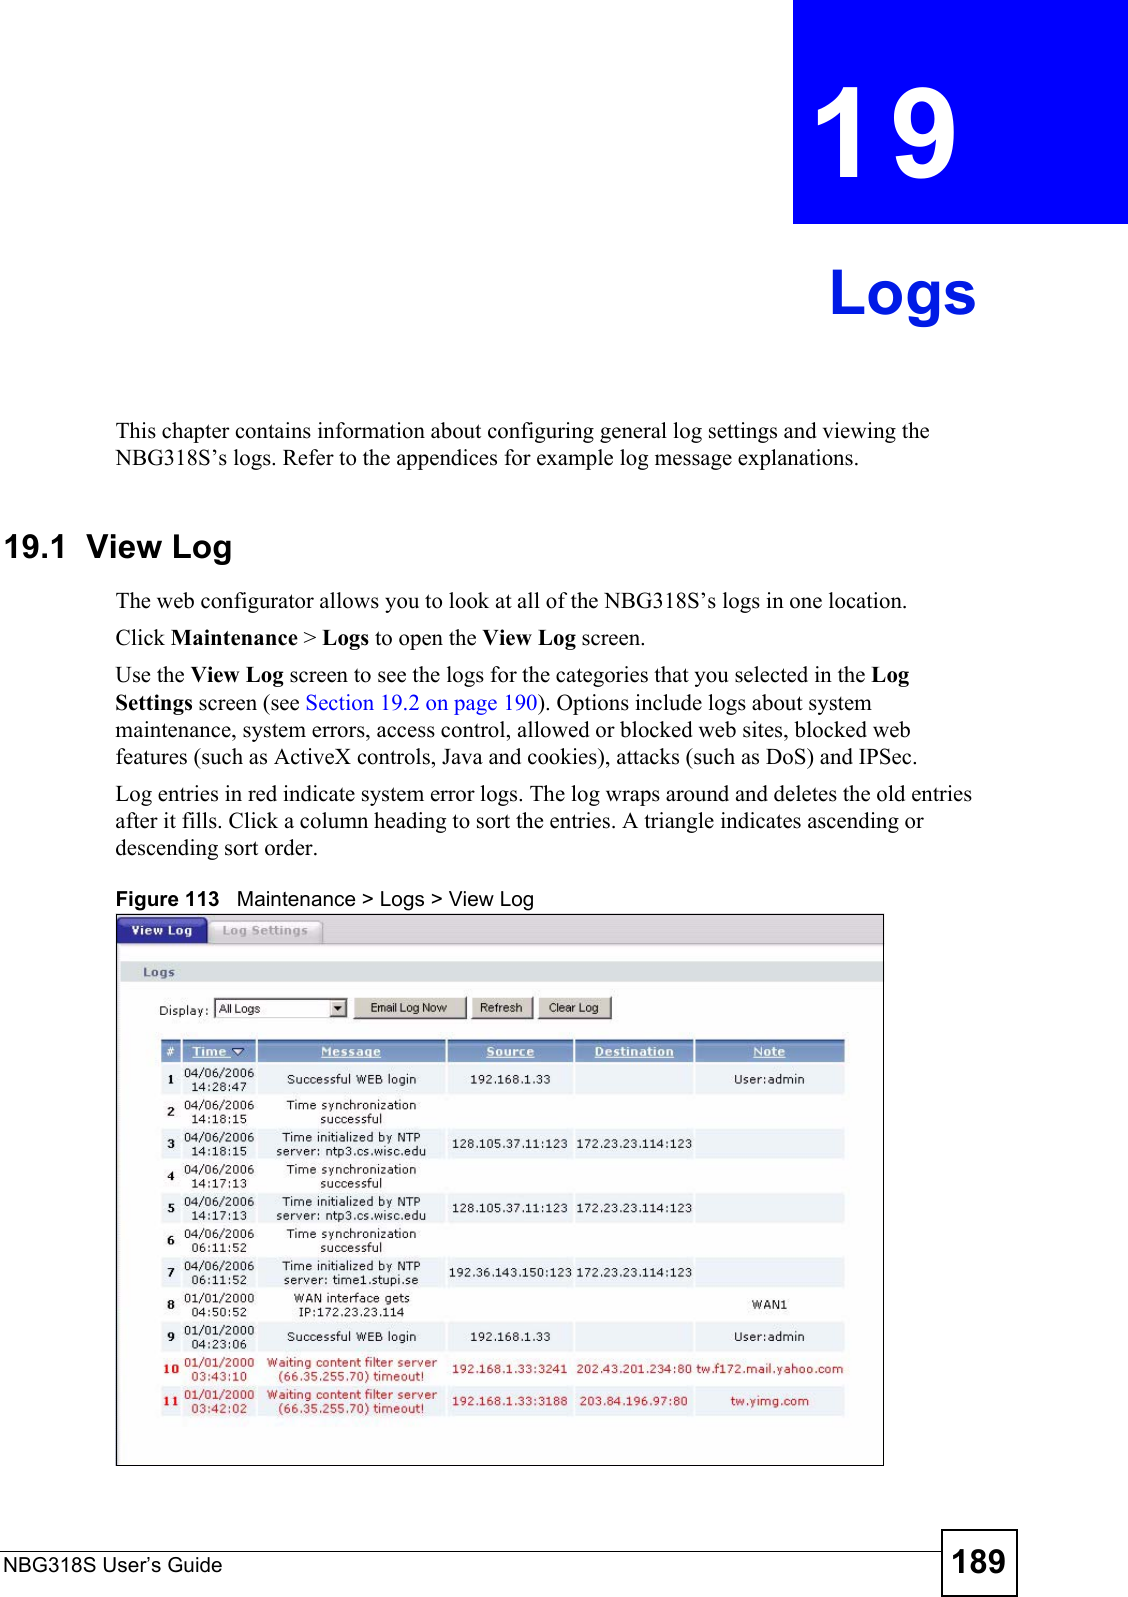 NBG318S User’s Guide 189CHAPTER  19 LogsThis chapter contains information about configuring general log settings and viewing the NBG318S’s logs. Refer to the appendices for example log message explanations.19.1  View Log The web configurator allows you to look at all of the NBG318S’s logs in one location. Click Maintenance &gt; Logs to open the View Log screen. Use the View Log screen to see the logs for the categories that you selected in the Log Settings screen (see Section 19.2 on page 190). Options include logs about system maintenance, system errors, access control, allowed or blocked web sites, blocked web features (such as ActiveX controls, Java and cookies), attacks (such as DoS) and IPSec.Log entries in red indicate system error logs. The log wraps around and deletes the old entries after it fills. Click a column heading to sort the entries. A triangle indicates ascending or descending sort order. Figure 113   Maintenance &gt; Logs &gt; View Log 